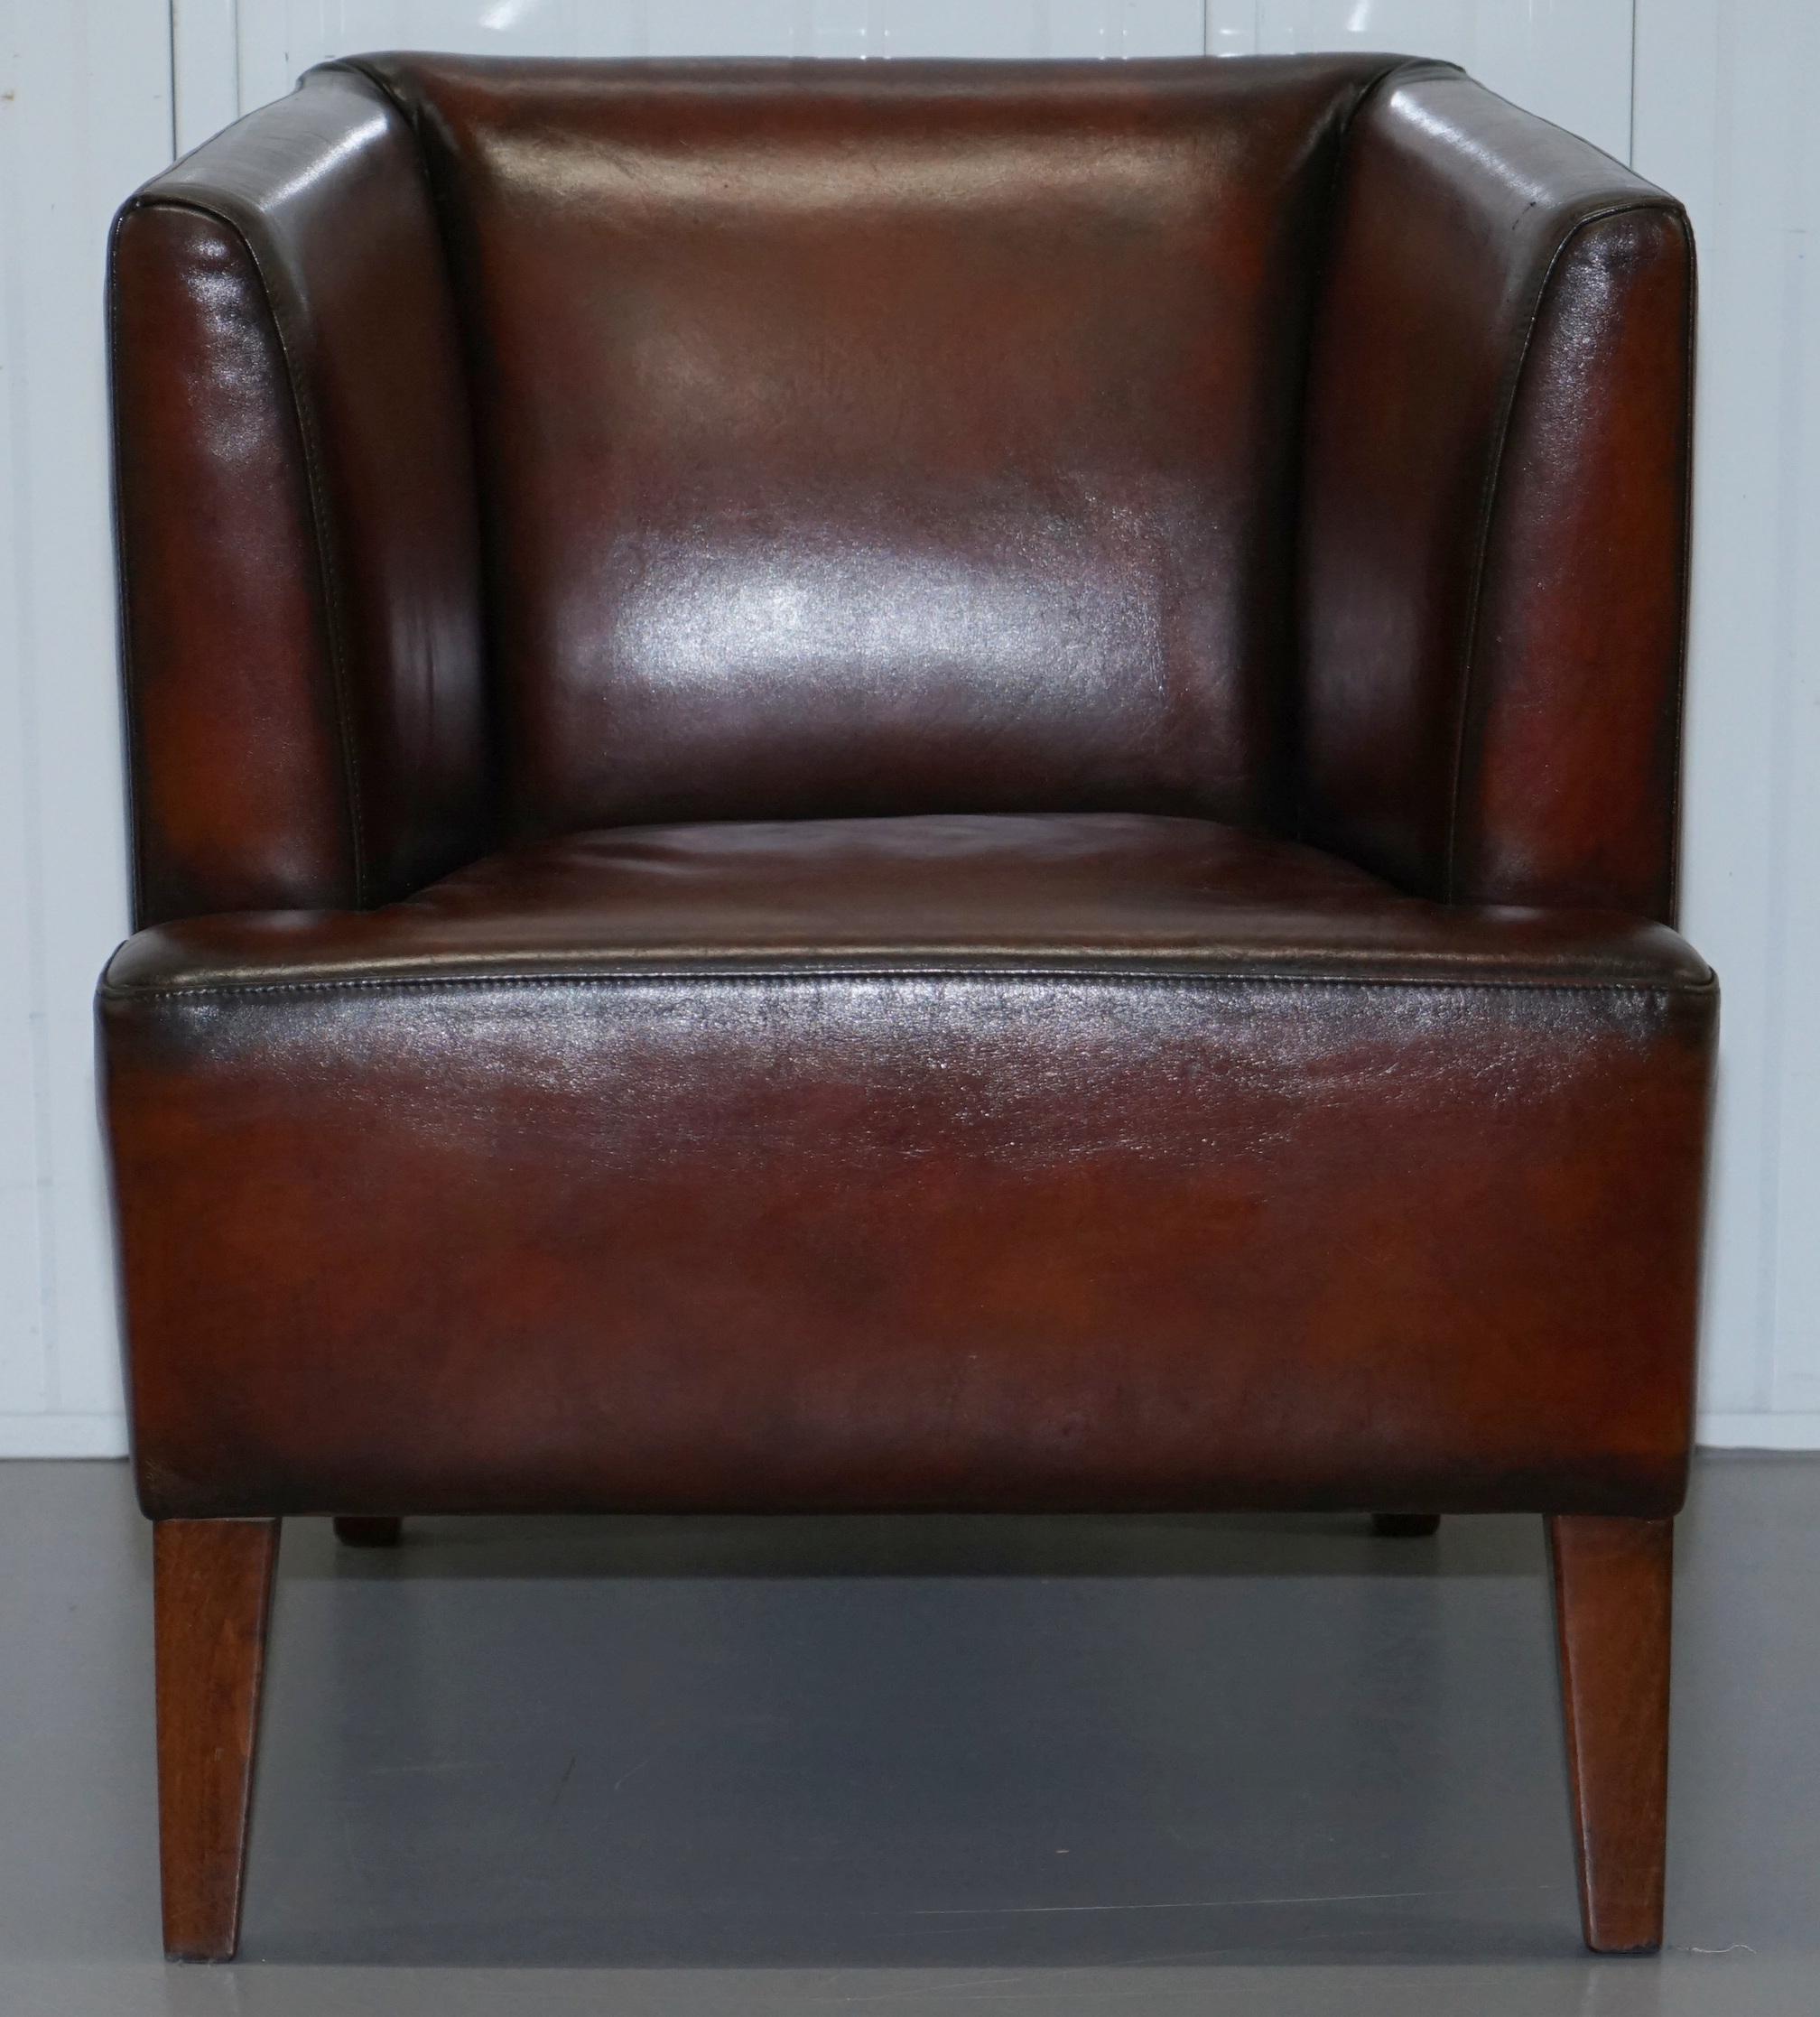 We are delighted to offer for sale this stunning fully restored dark whiskey brown leather club armchair in fully restored condition

A very good looking and nicely refurbished piece, the leather has been stripped back to the natural colour of the